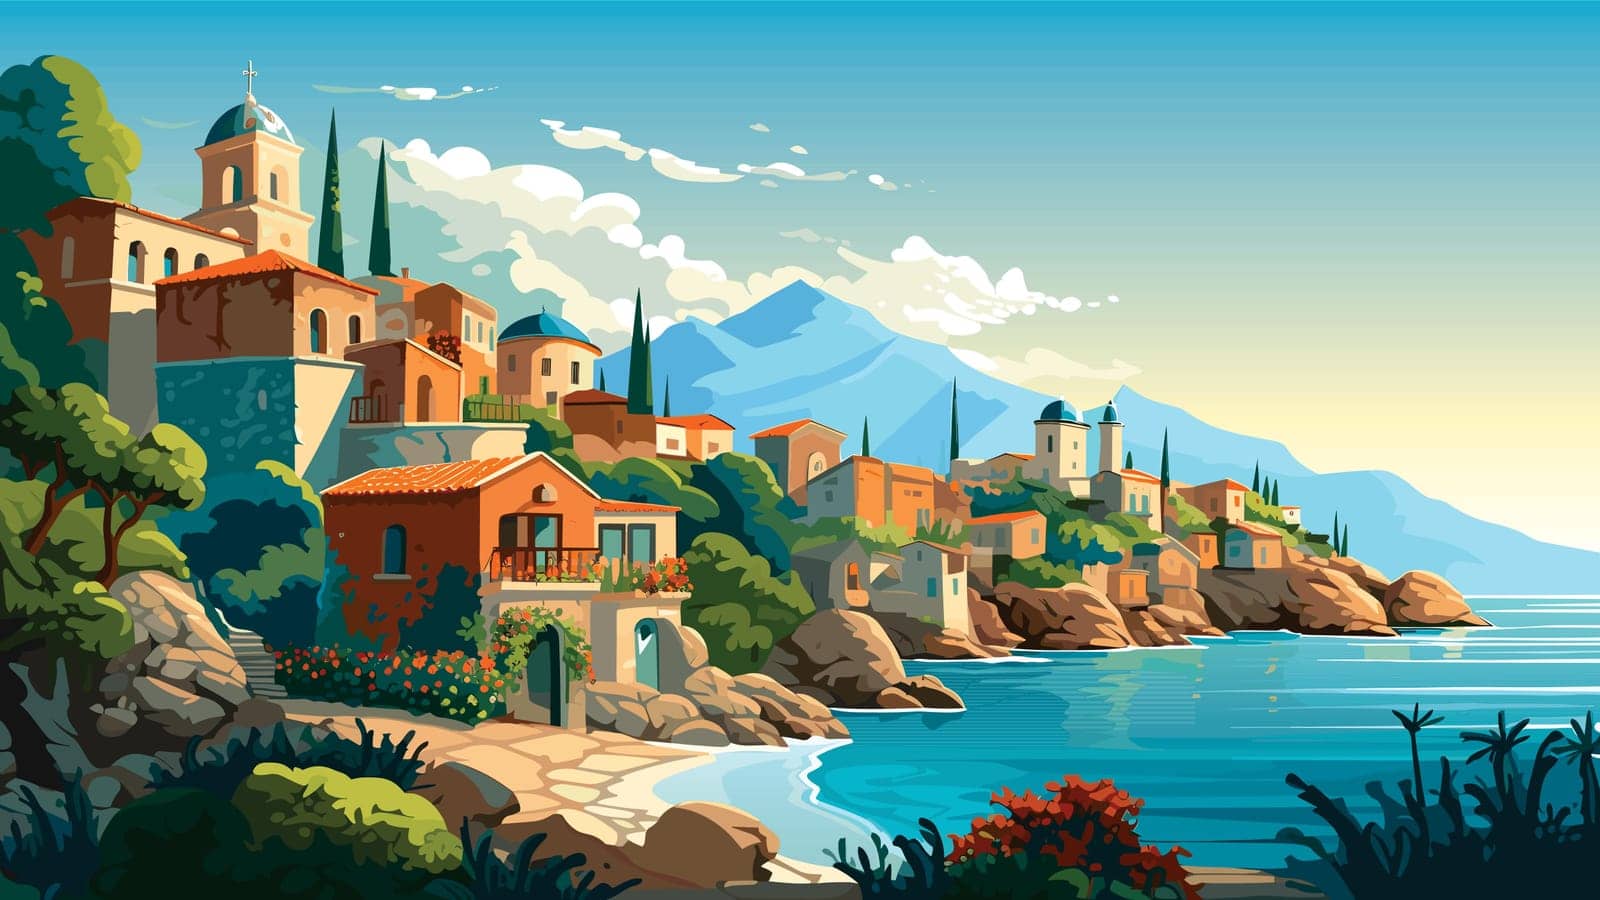 Picturesque coastal village with terra-cotta roofs nestled among lush greenery, overlooking serene blue waters with distant mountains under a clear sky.